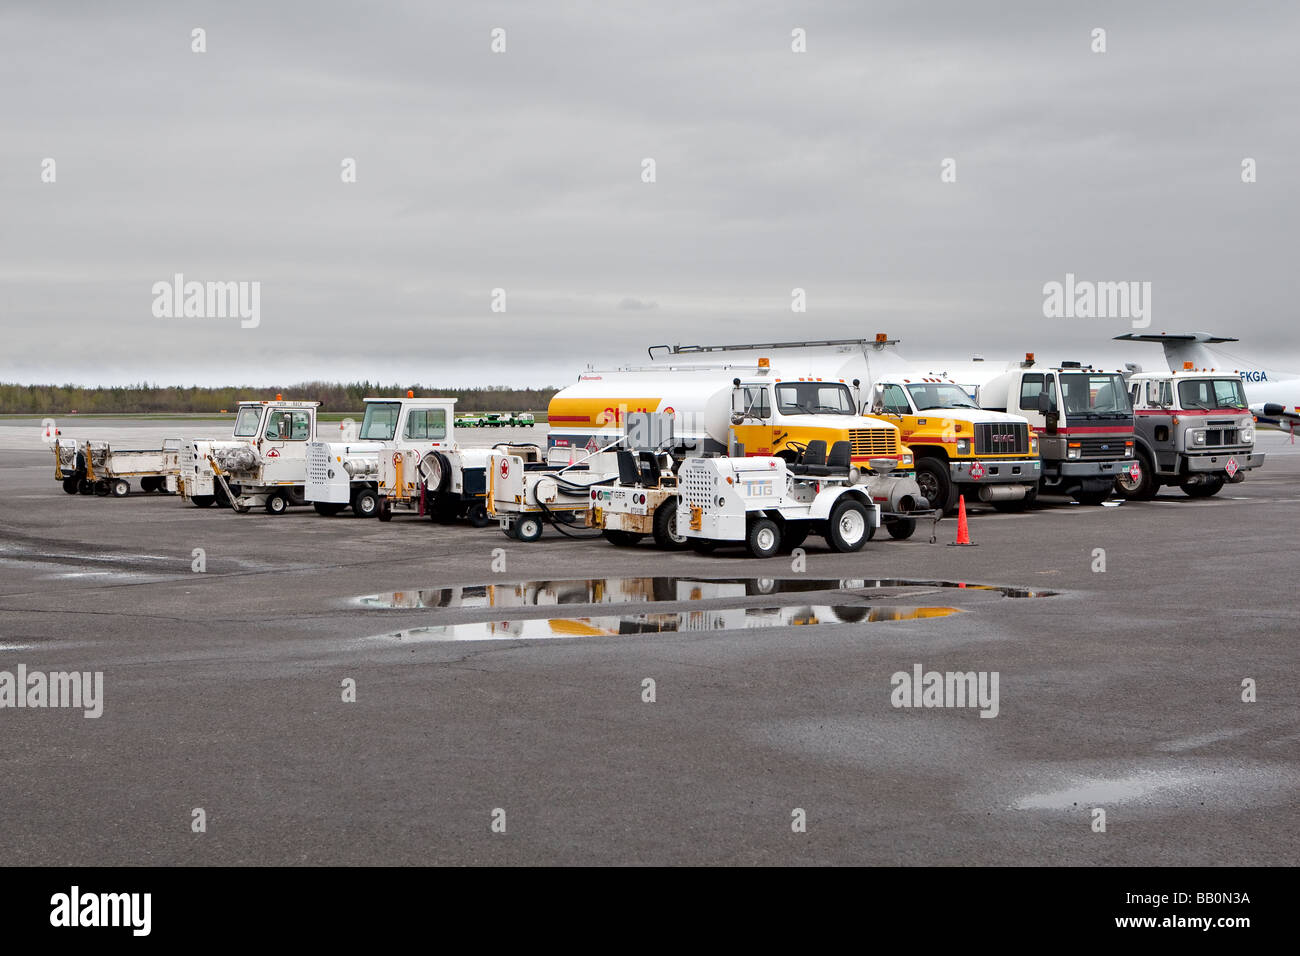 Various Airport vehicles lie on the Aerocentre Petro T tarmac at the Jean Lessage International airport in Quebec city Stock Photo